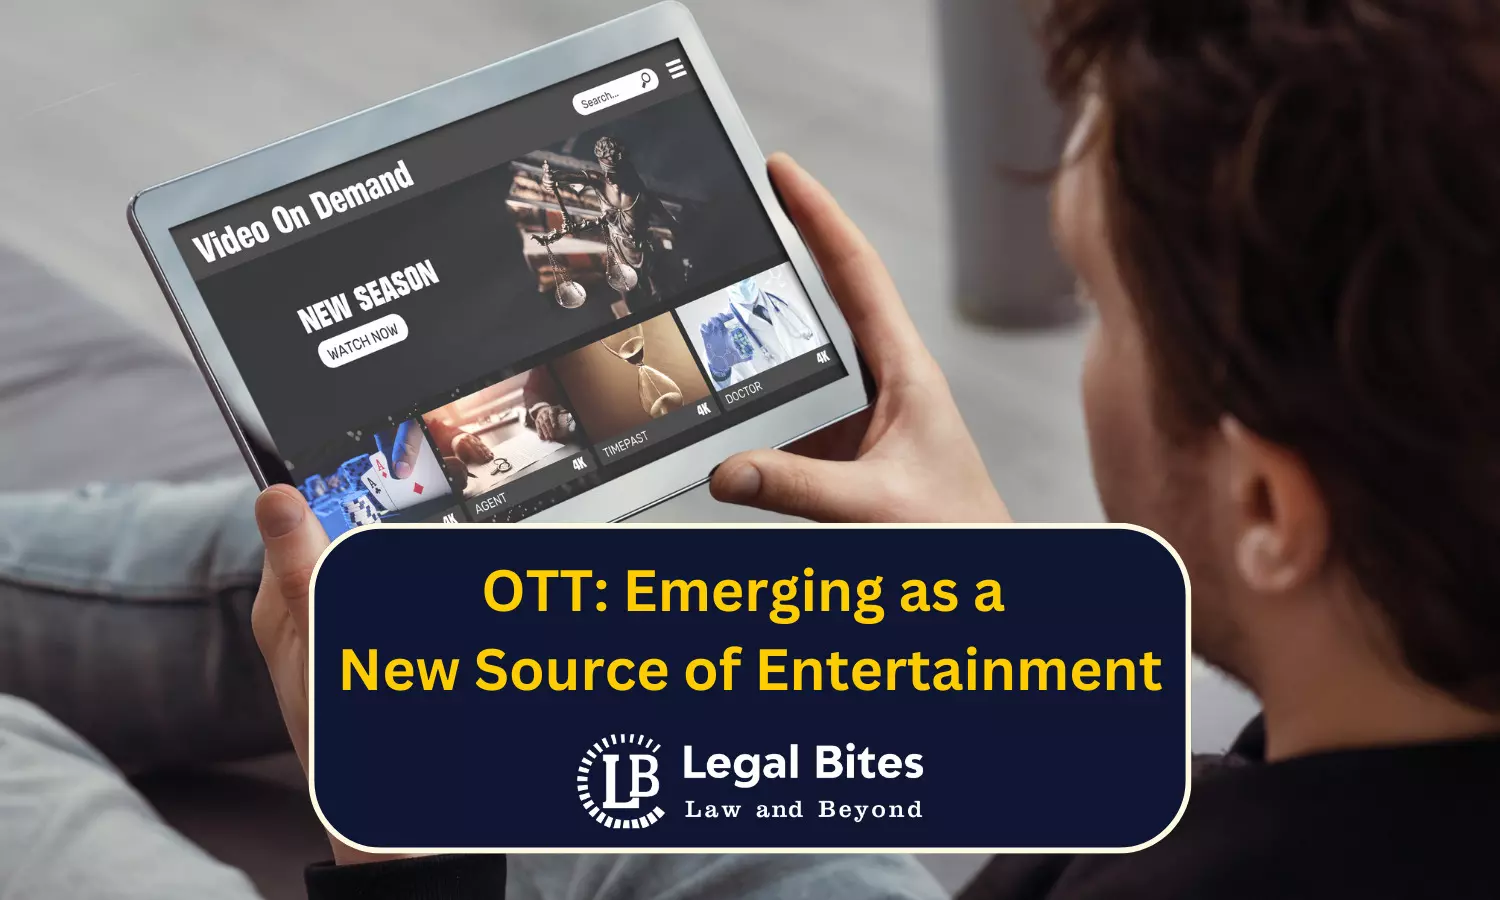 OTT: Emerging as a New Source of Entertainment